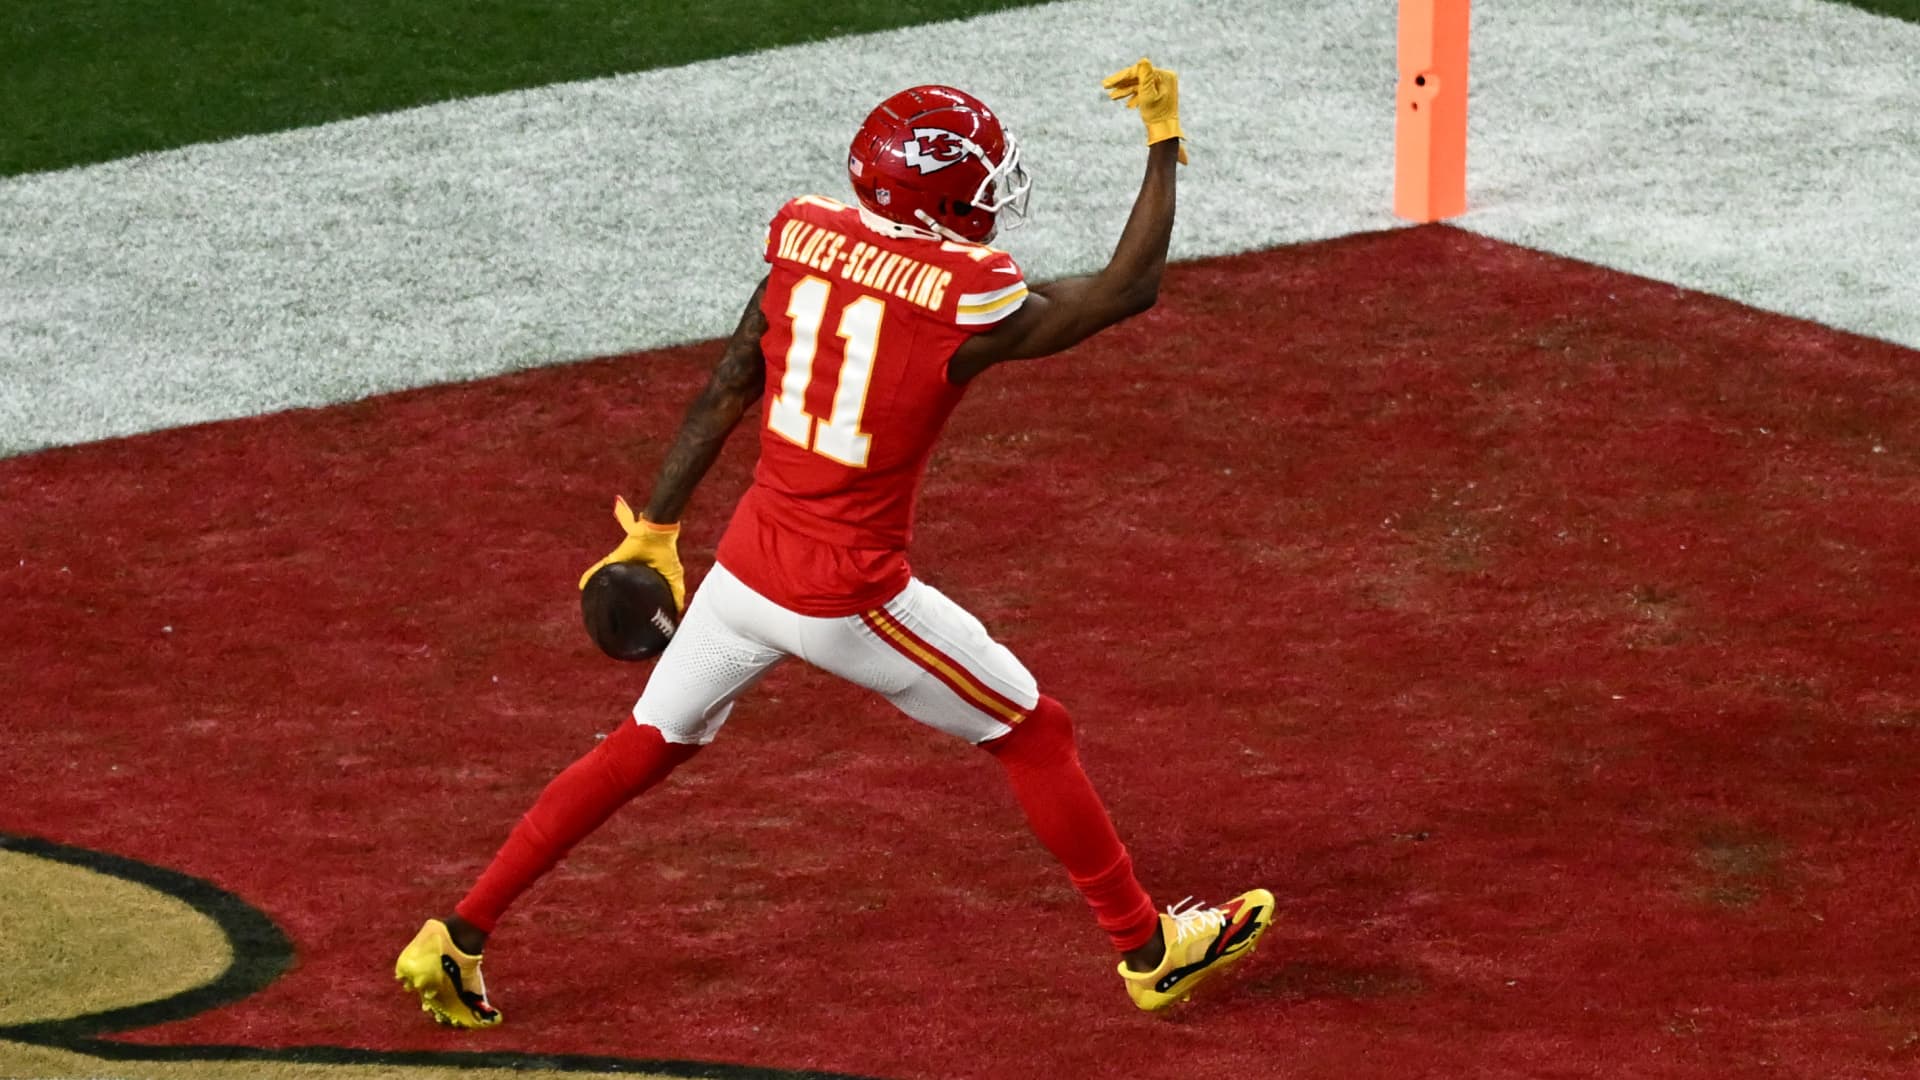 Kansas City Chiefs' wide receiver #11 Marquez Valdes-Scantling celebrates after scoring a touchdown during Super Bowl LVIII between the Kansas City Chiefs and the San Francisco 49ers at Allegiant Stadium in Las Vegas, Nevada, February 11, 2024.